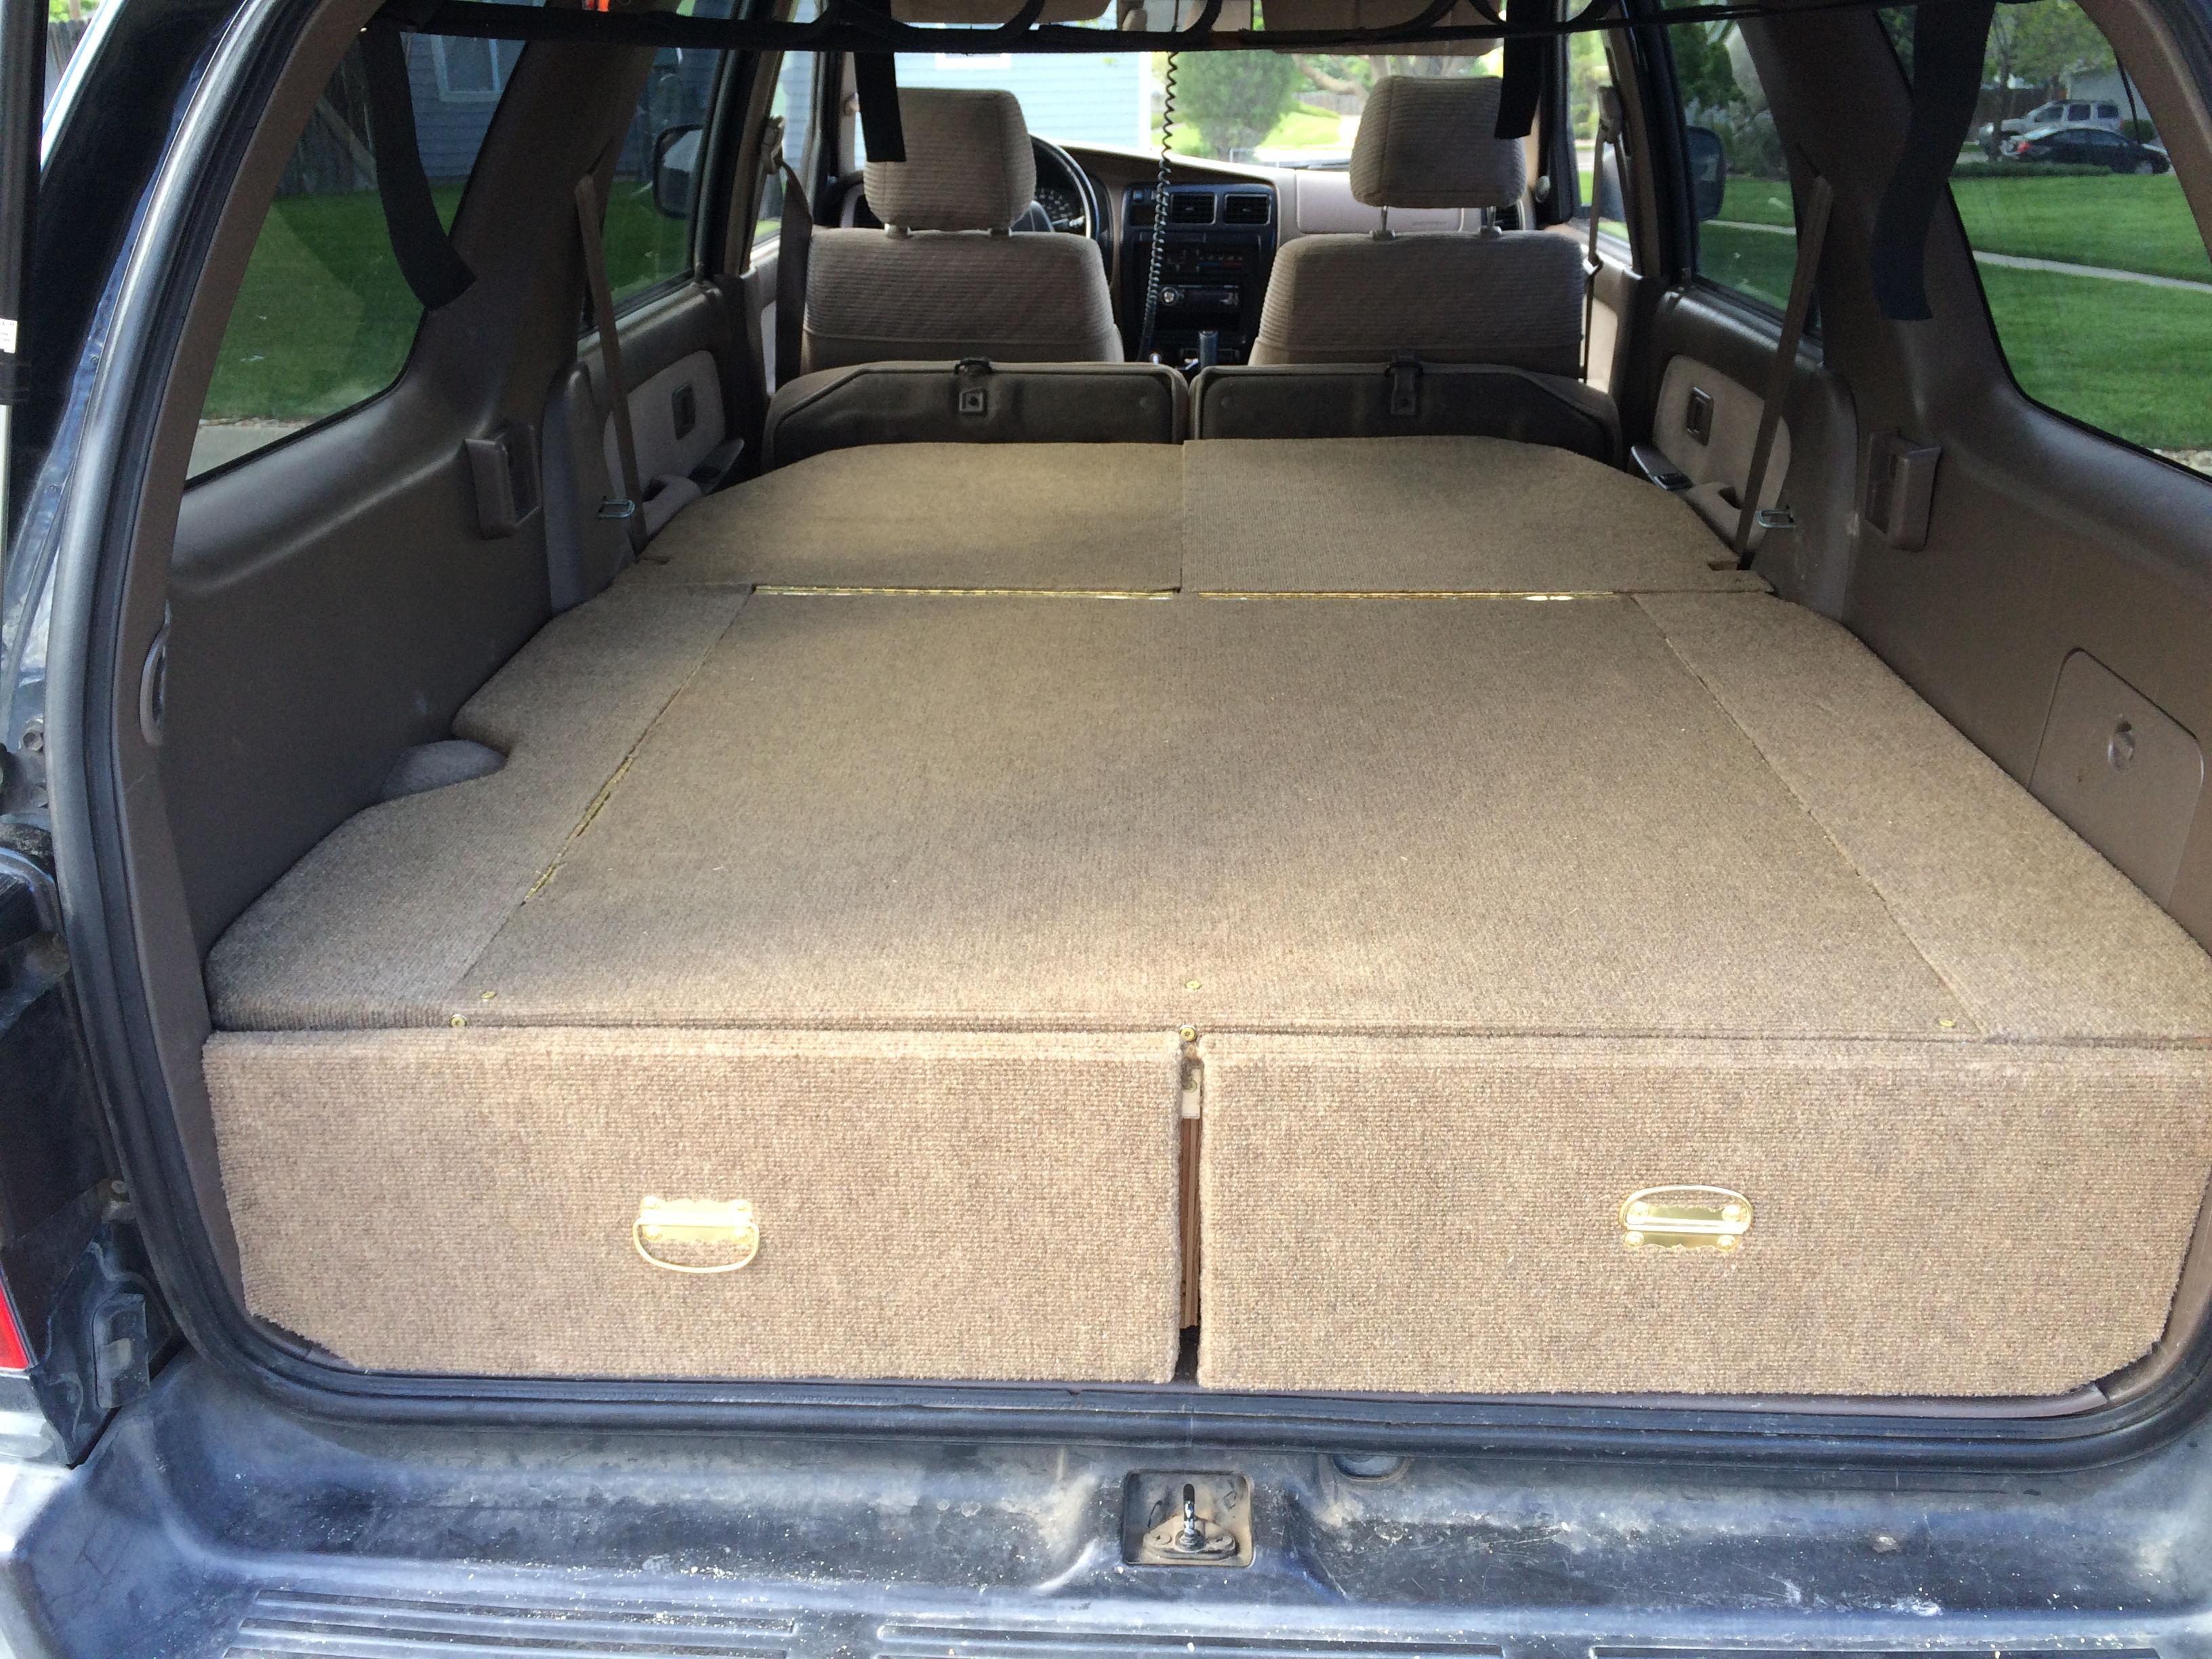 How To Build A 4runner Sleeping And Storage Area Fort